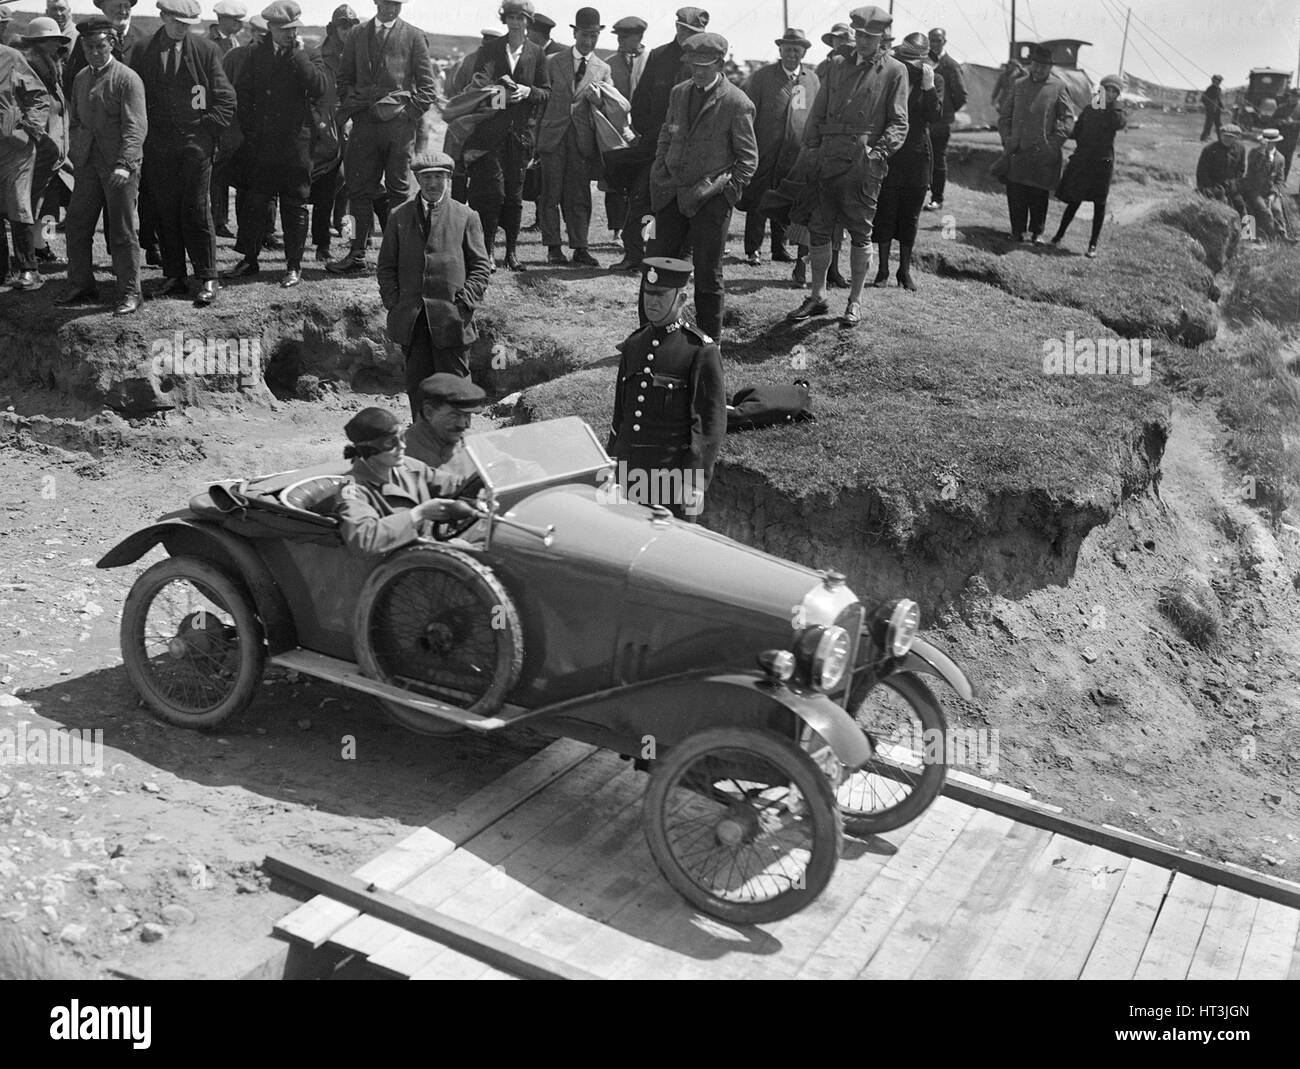 Amilcar Type CC Petit Sport at the Porthcawl Speed Trials, Wales, 1922. Artist: Bill Brunell. Stock Photo